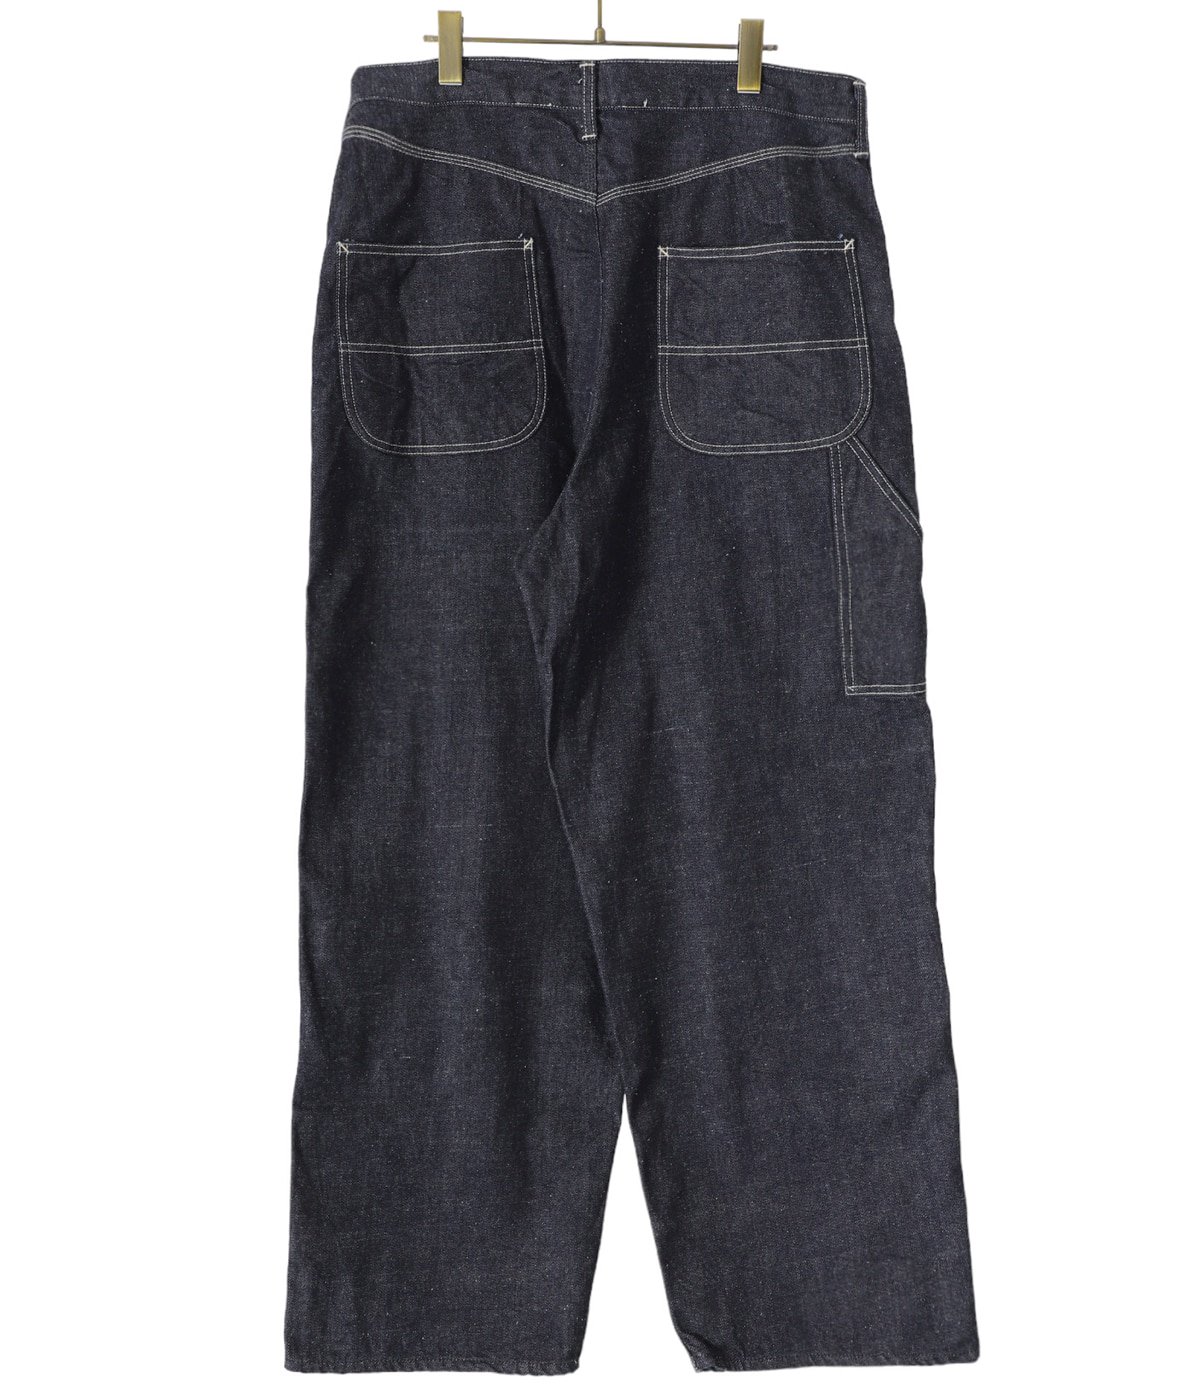 RECYCLED WASTE SUVIN COTTON YARN 11.5oz. DENIM PAINTER PANTS